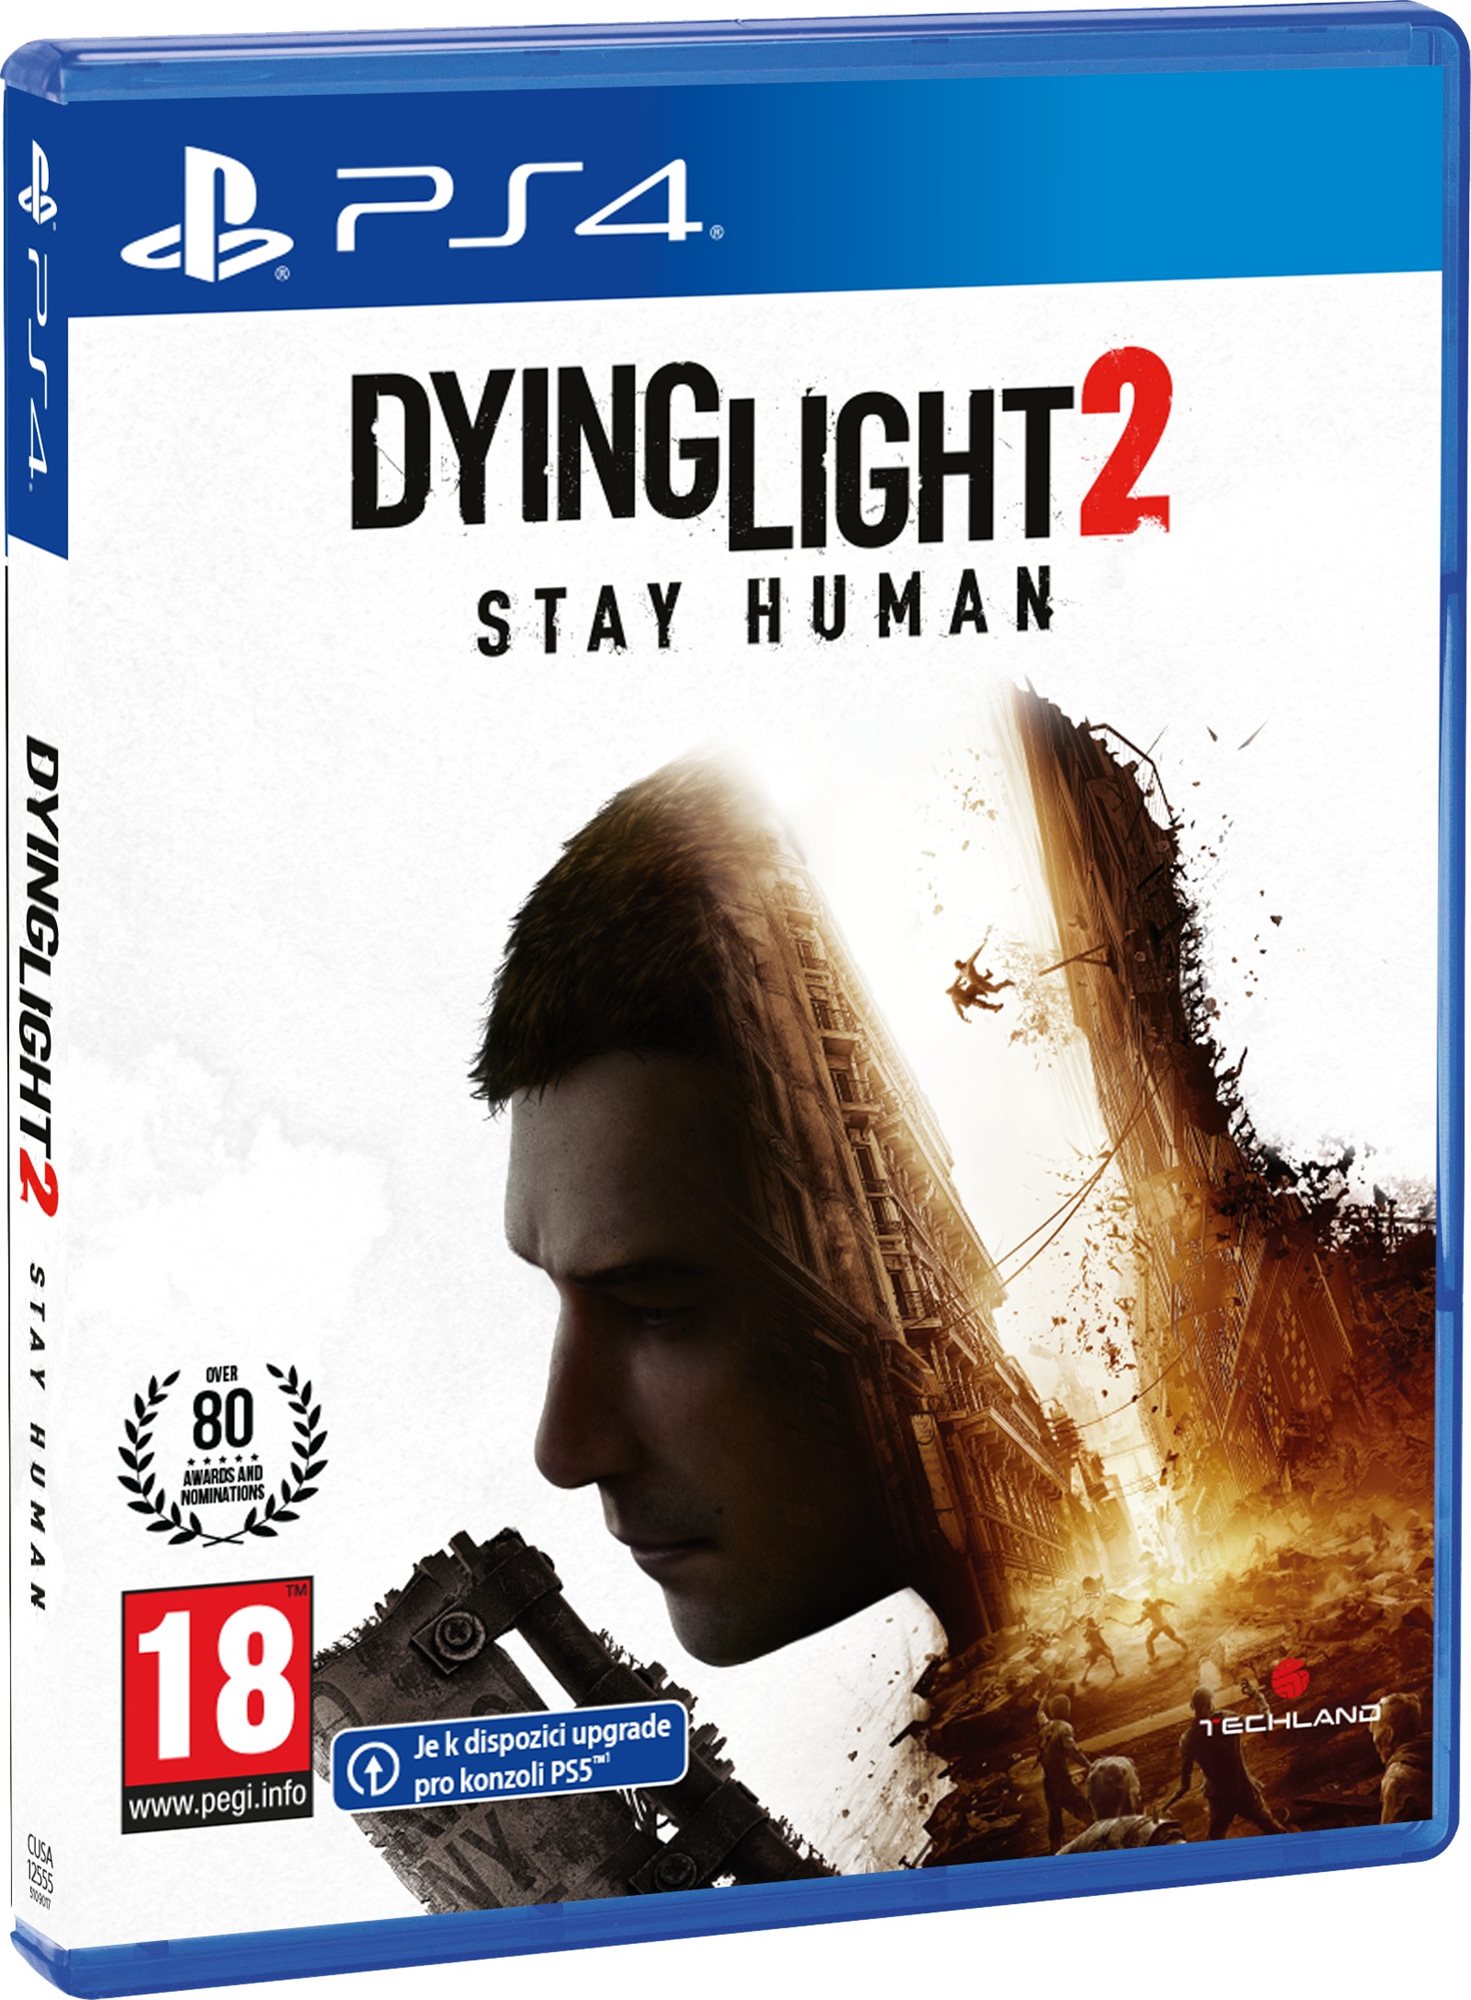 Dying Light 2: Stay Human - PS4